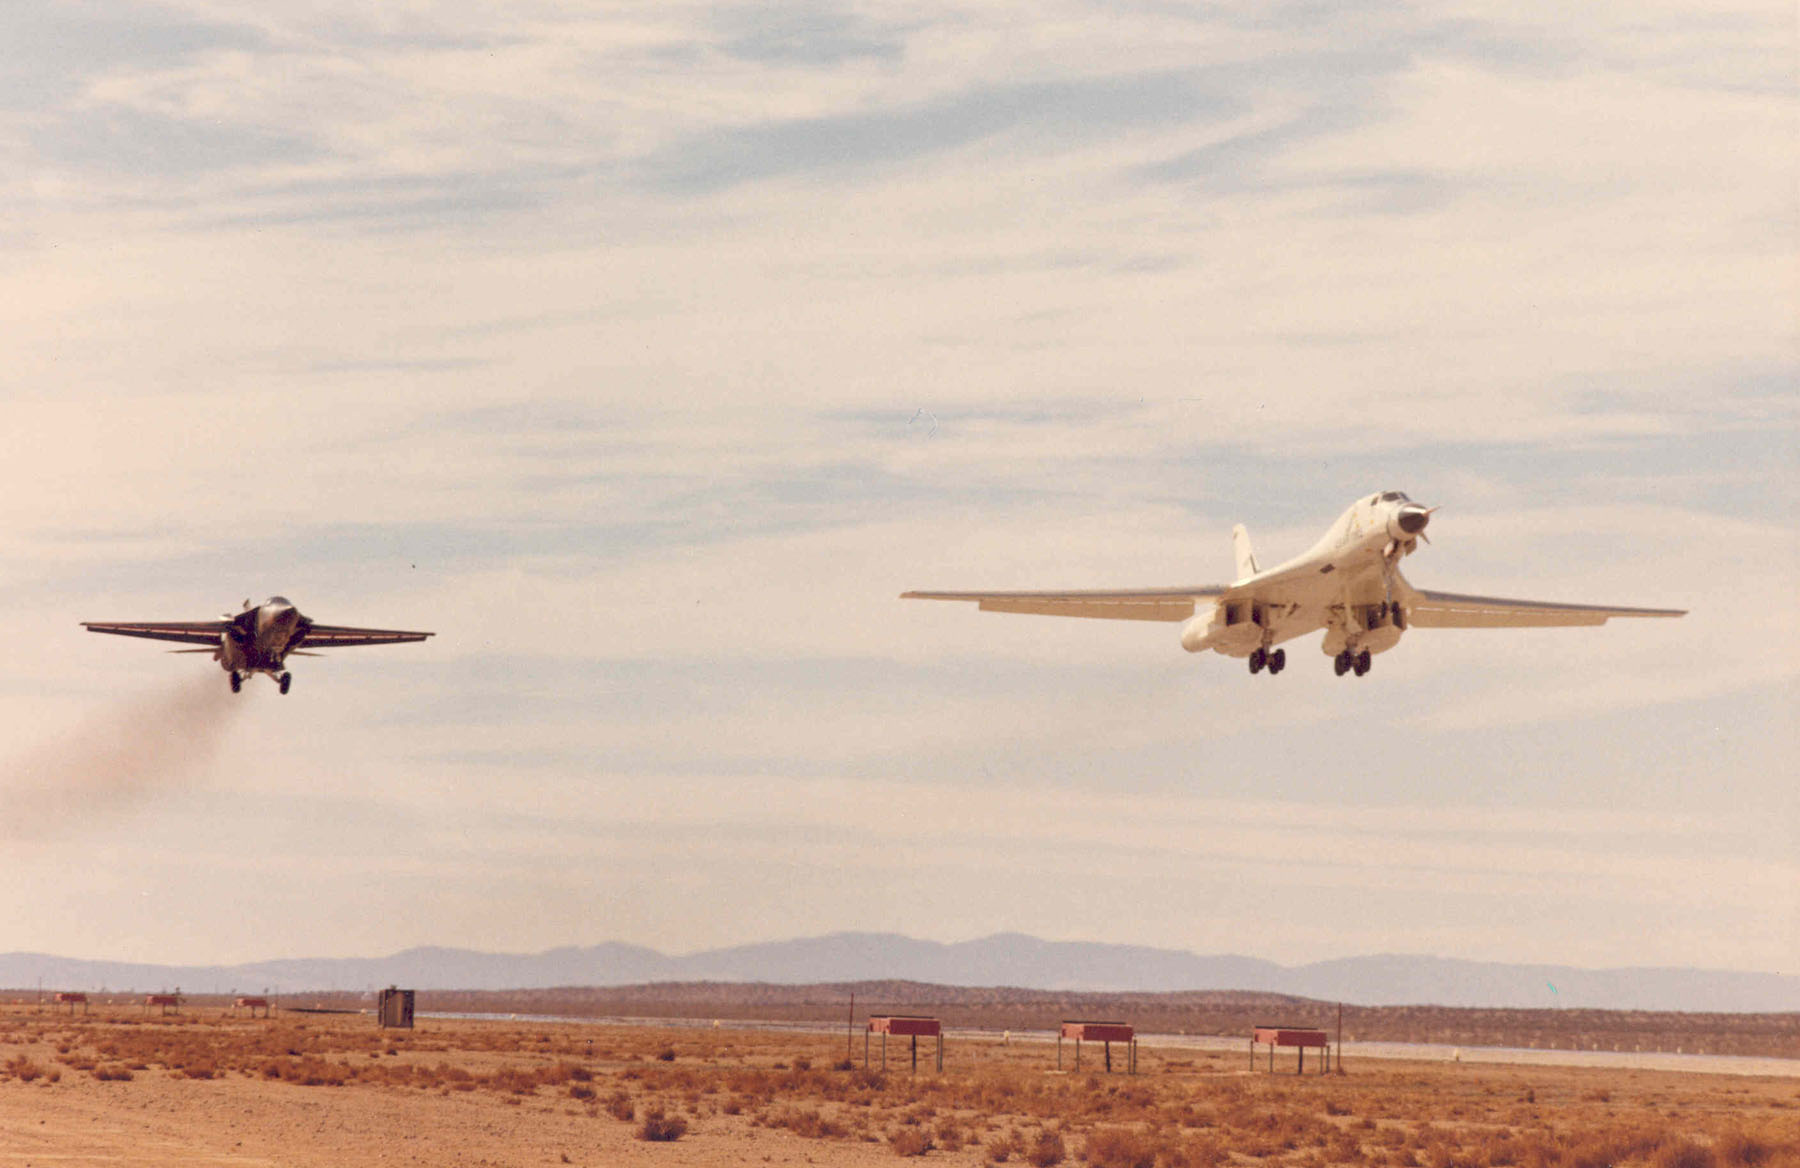 Rockwell B-1A 74-0158 with a General Dynamics F-111 chase plane, landing at Edwards Air Force base. (U.S. Air Force) 